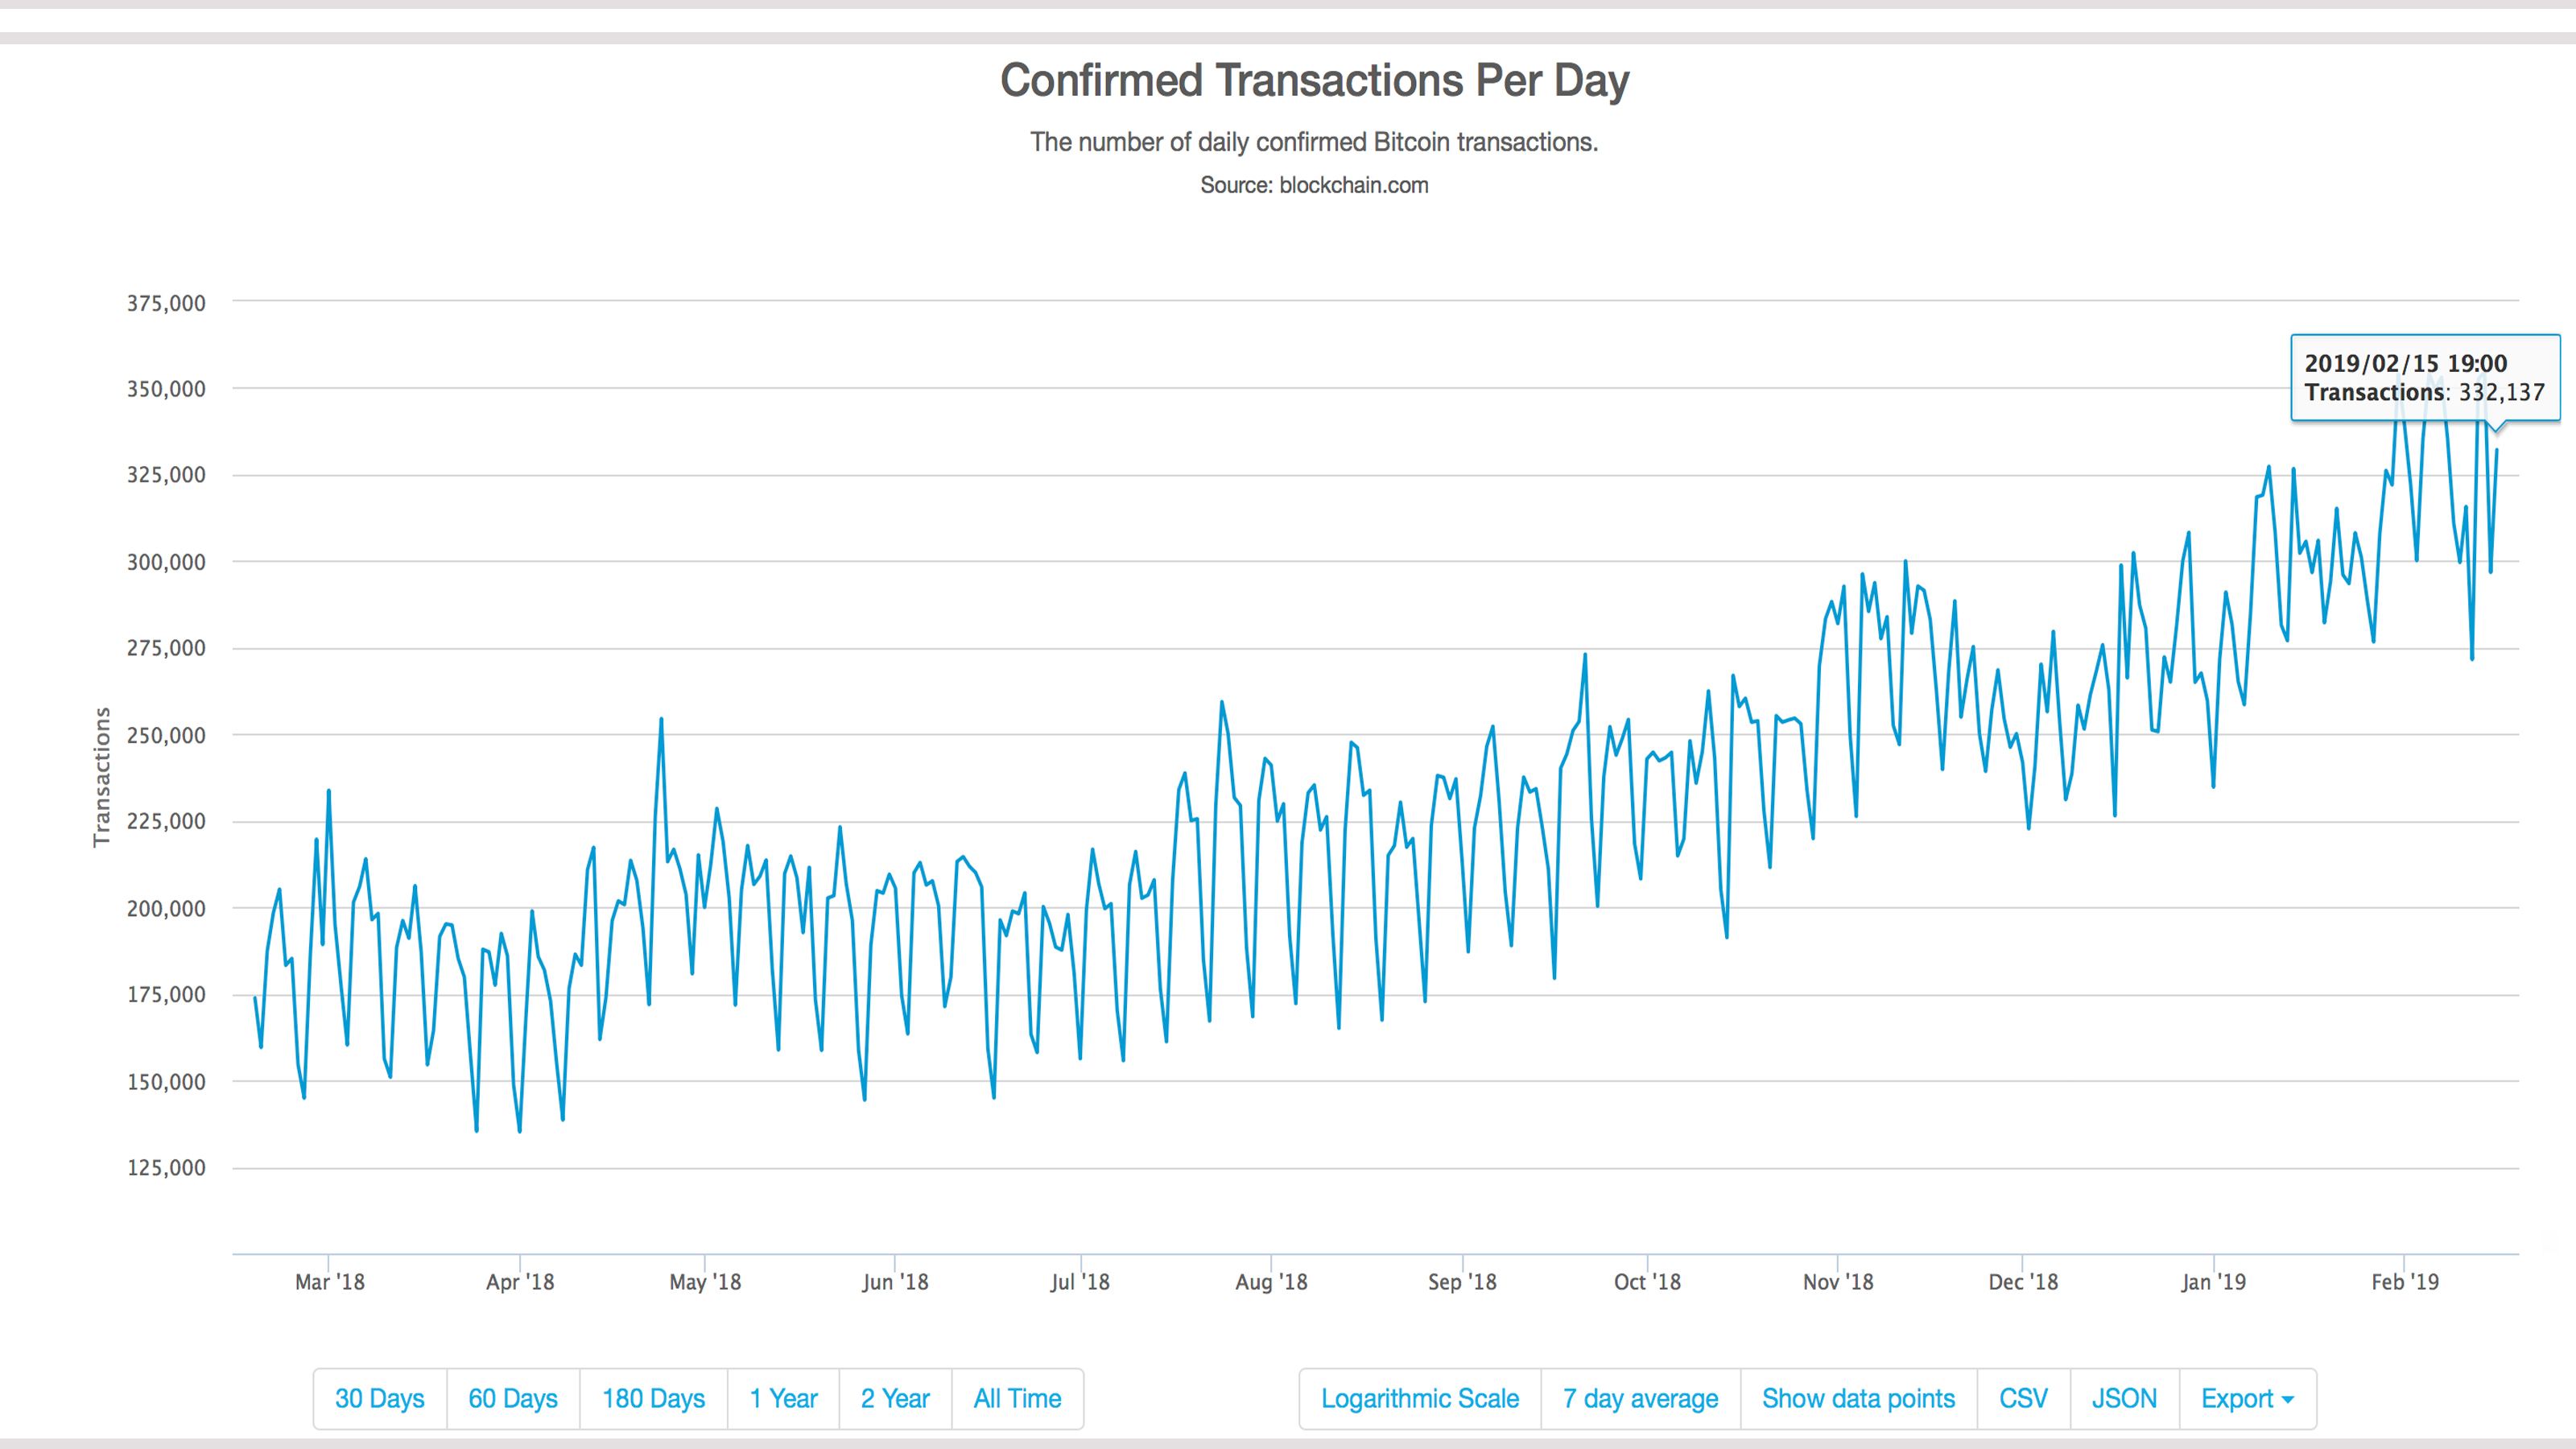 More Than 30% of BTC Traffic Stems from the Veriblock Project